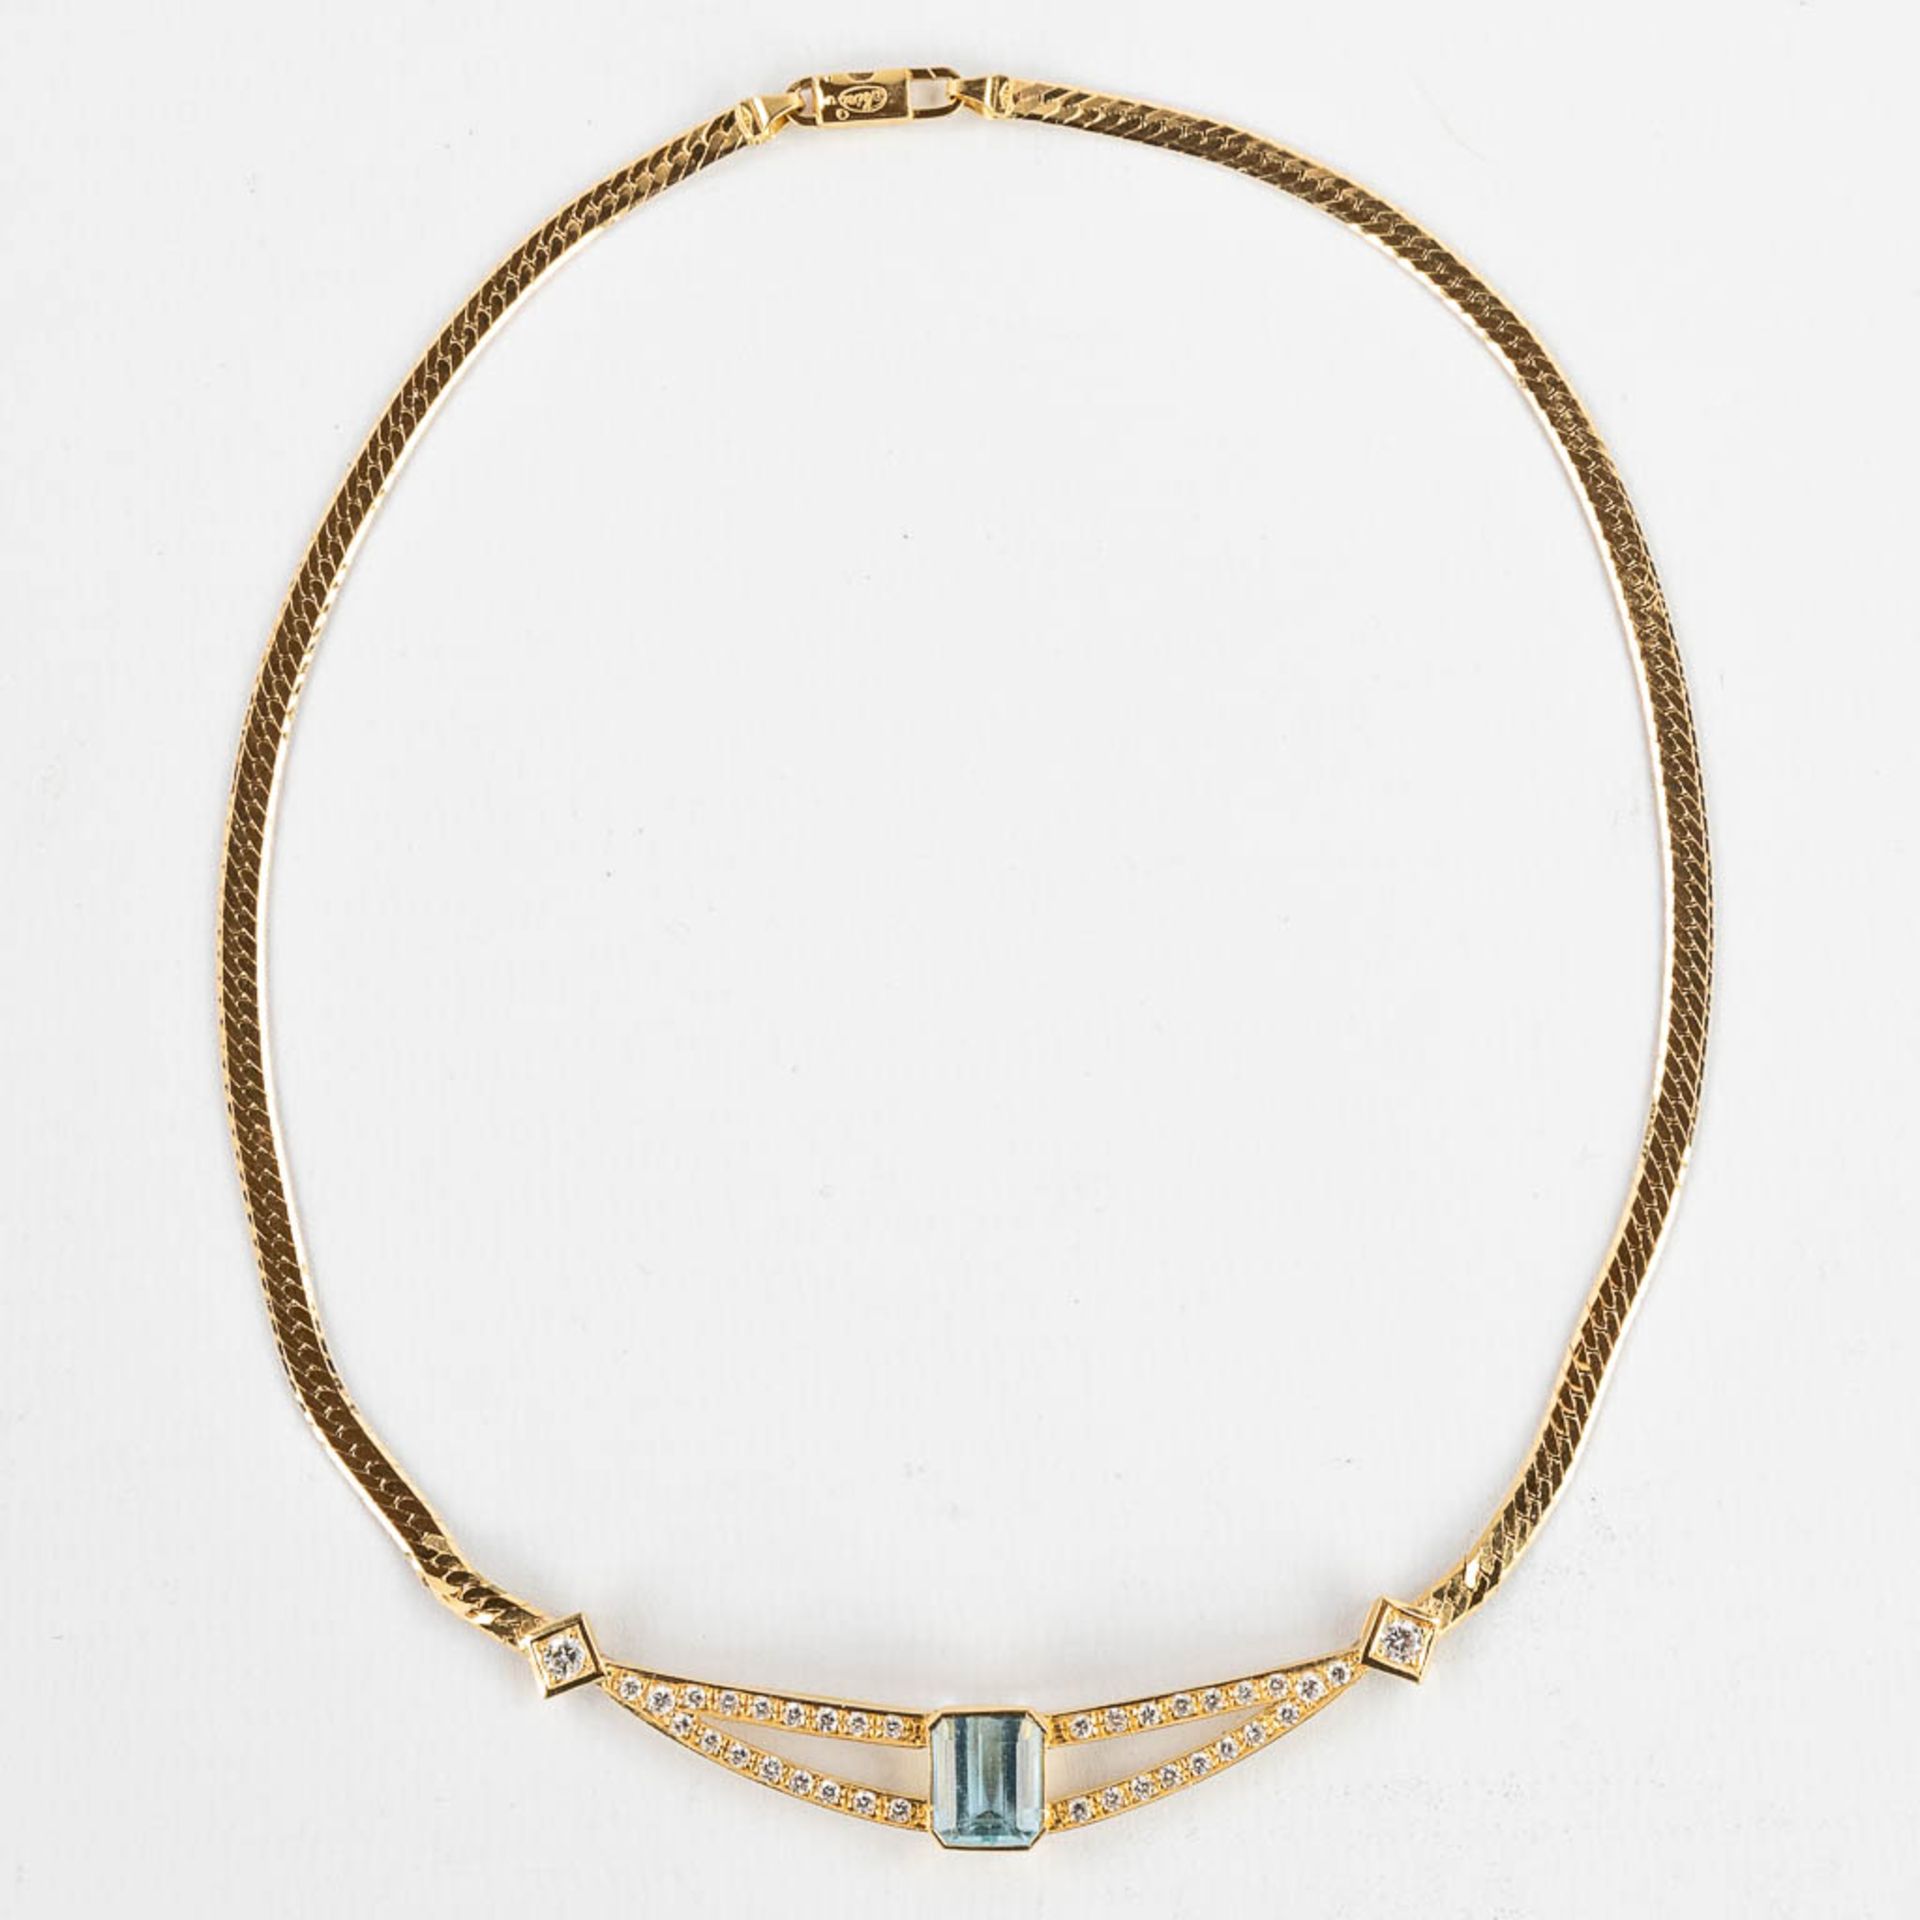 A necklace with two earrings, 18kt yellow gold Brilliants and Topaz/Aquamarine, 26,77g. - Image 4 of 15